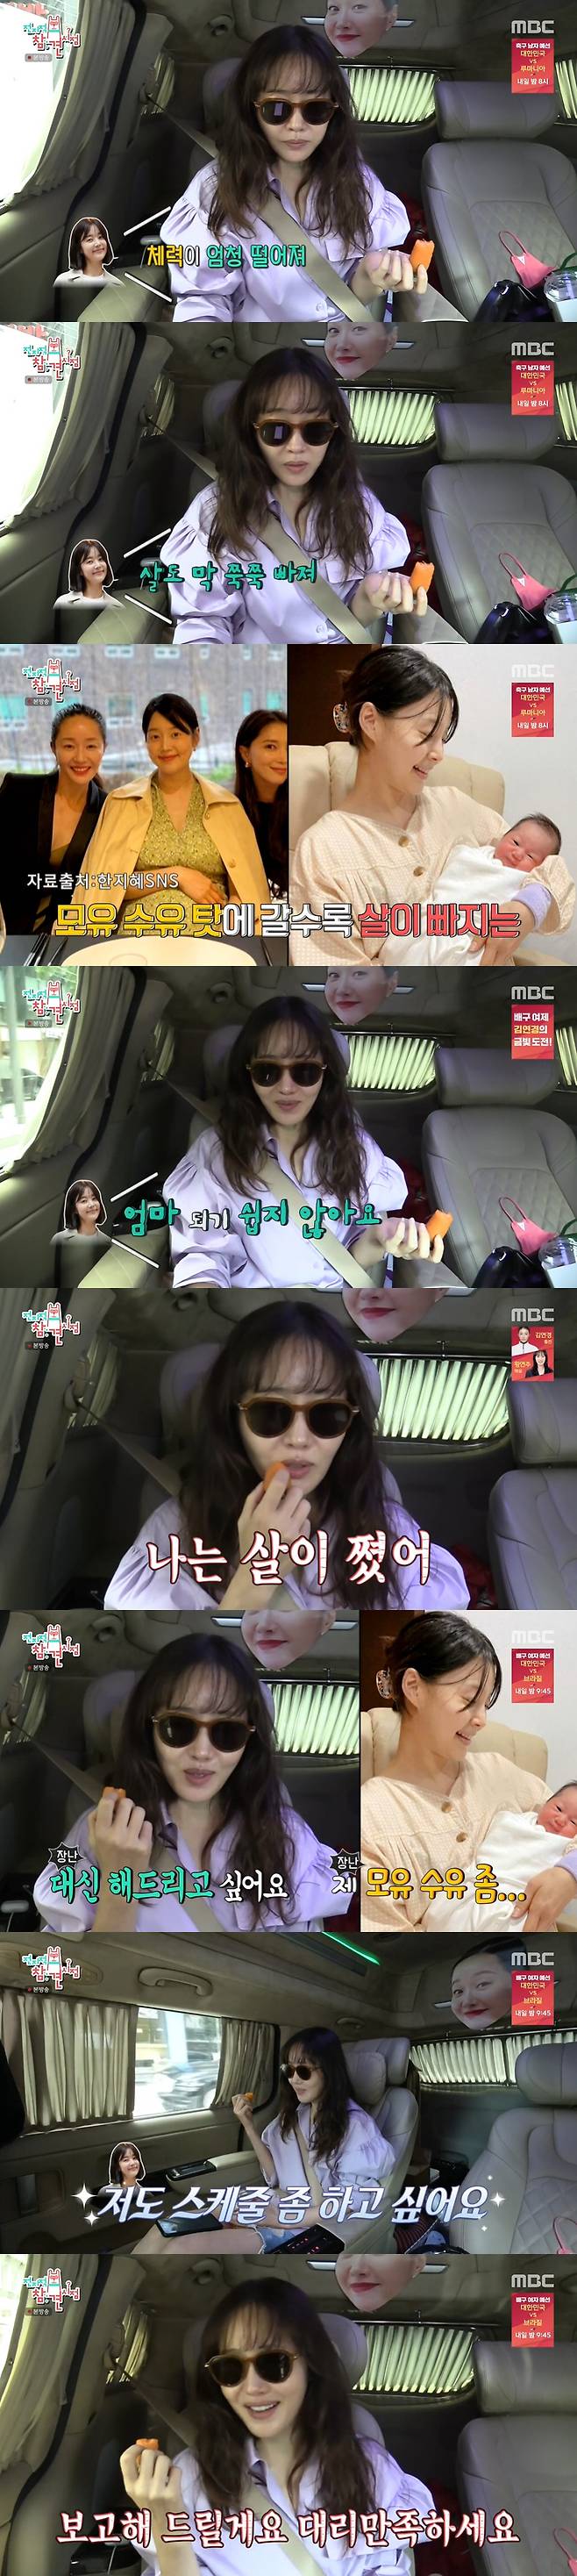 Actor Han Ji-hye has shared her routine after becoming a mother24 Days MBC Point of Omniscient Interfere was broadcast on the daily life of Actor Uhm Ji-won was revealed.On this day, Uhm Ji-won tried to make a phone call while going to shoot a picture, saying, Lets call Wisdom?Actor Han Ji-hye, who is the best friend of Uhm Ji-won, is now in the process of being cooked after a while ago.Han Ji-hye said, What are you doing? I am breast-massing, he said. I am suffering from breastfeeding.Breastfeeding was sick at first, but it is not easy now, he said. I feel very weak. I lose weight all the time.Uhm Ji-won then worried that I do not have any flesh, but I am getting out of it, and Han Ji-hye said, It is not easy to be a mother.Im going to shoot a picture, said Uhm Ji-won.I eat a lot in Jeju Island and I get fat, and Han Ji-hye laughed at Breastfeeding .Han Ji-hye said, I want to schedule a little.